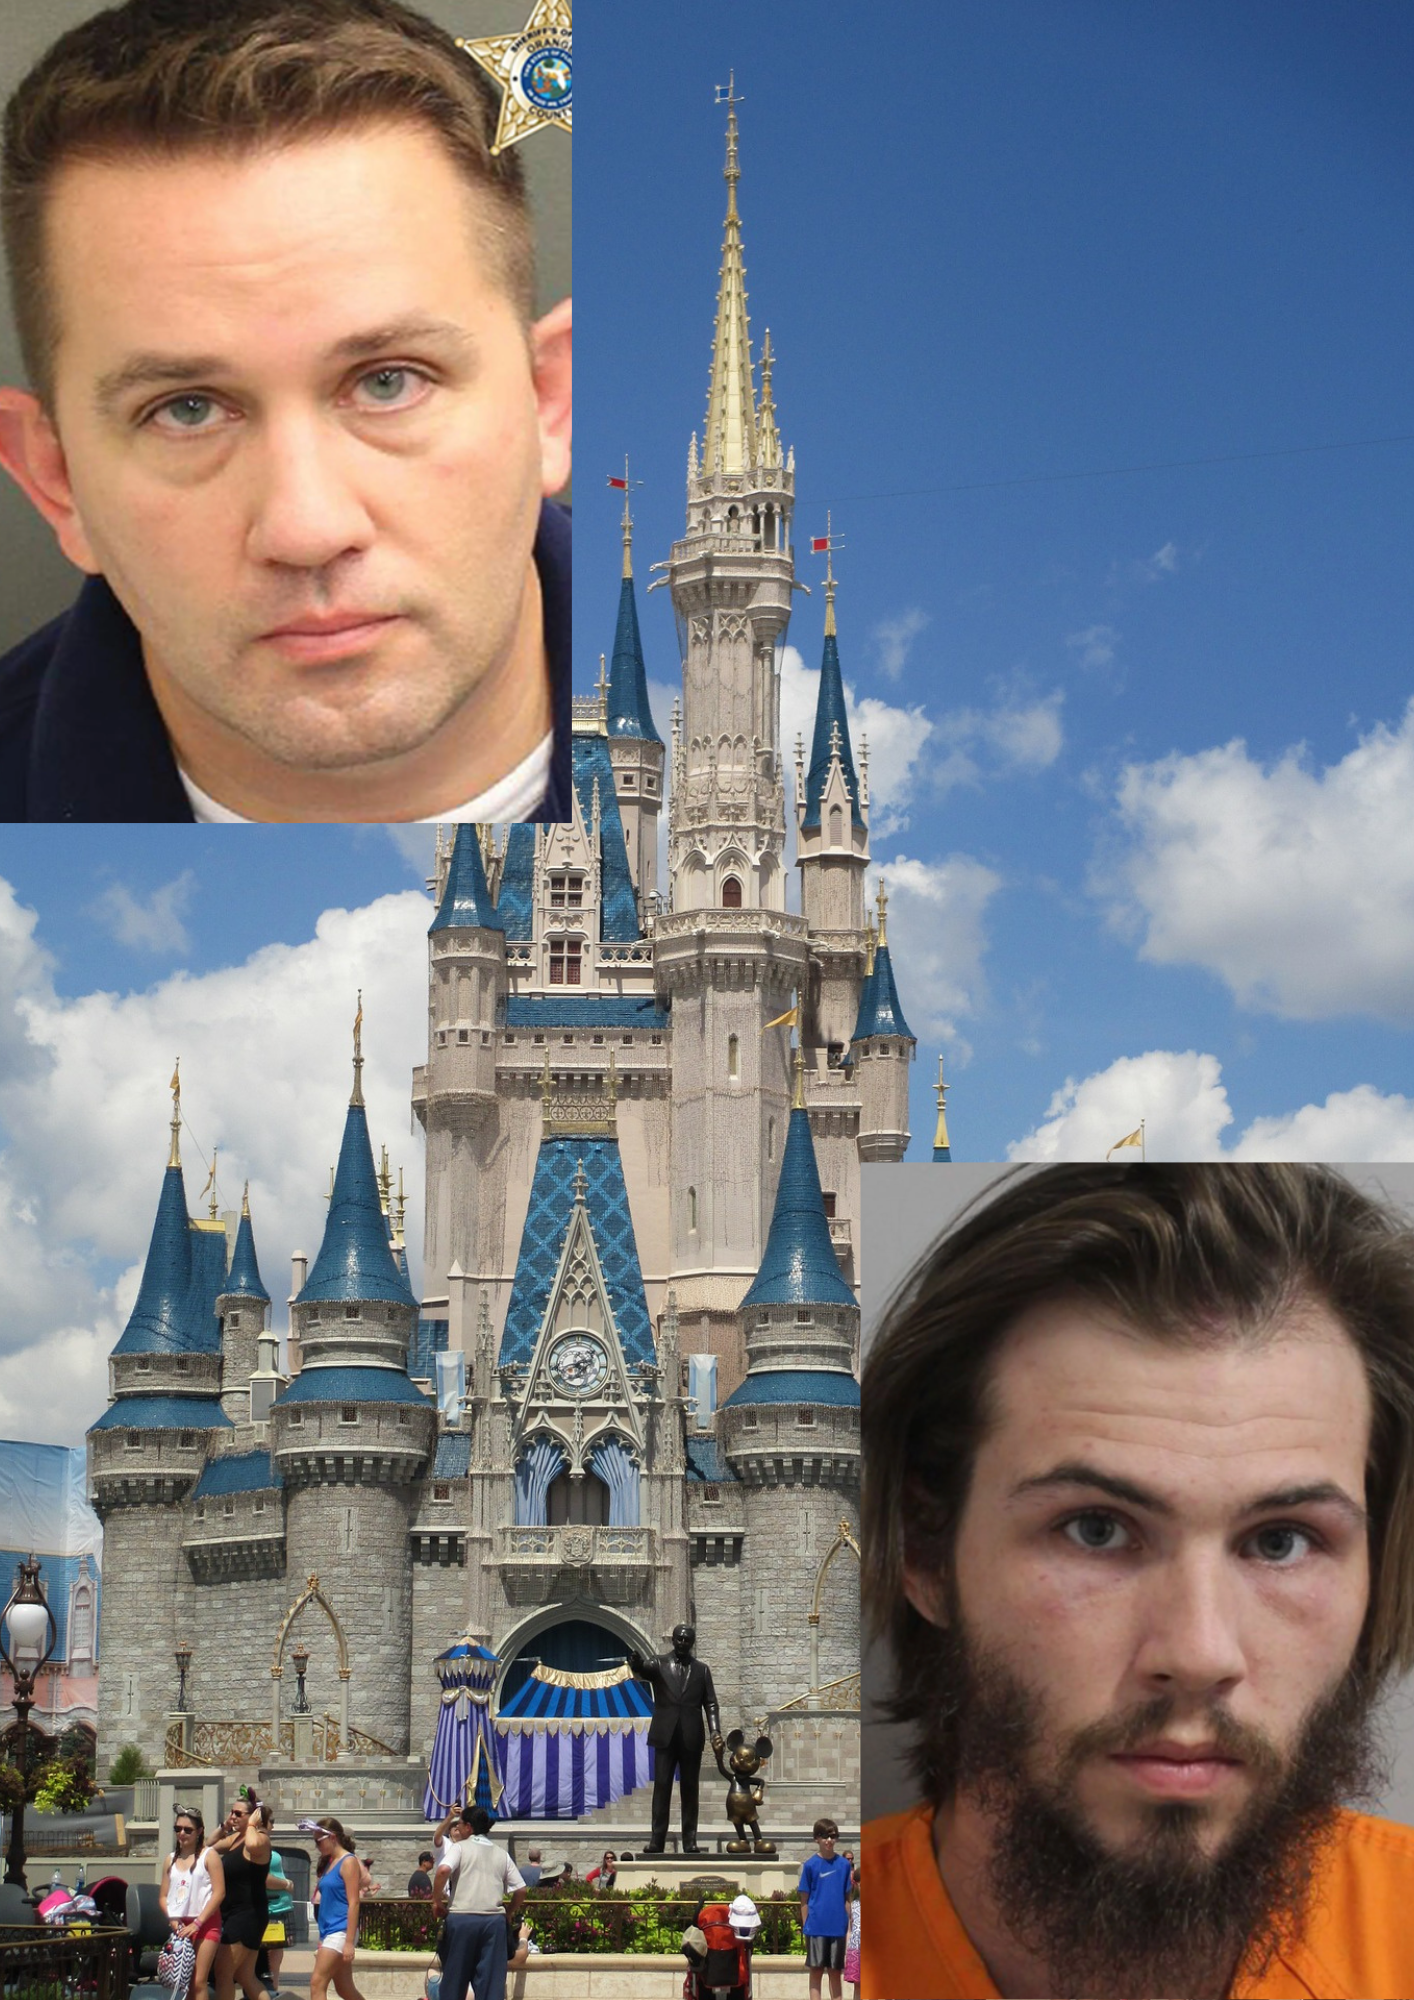 Operation Cyber Guardian II Nabs 2 More Disney Employees During Undercover Sexual Predator Sting 4